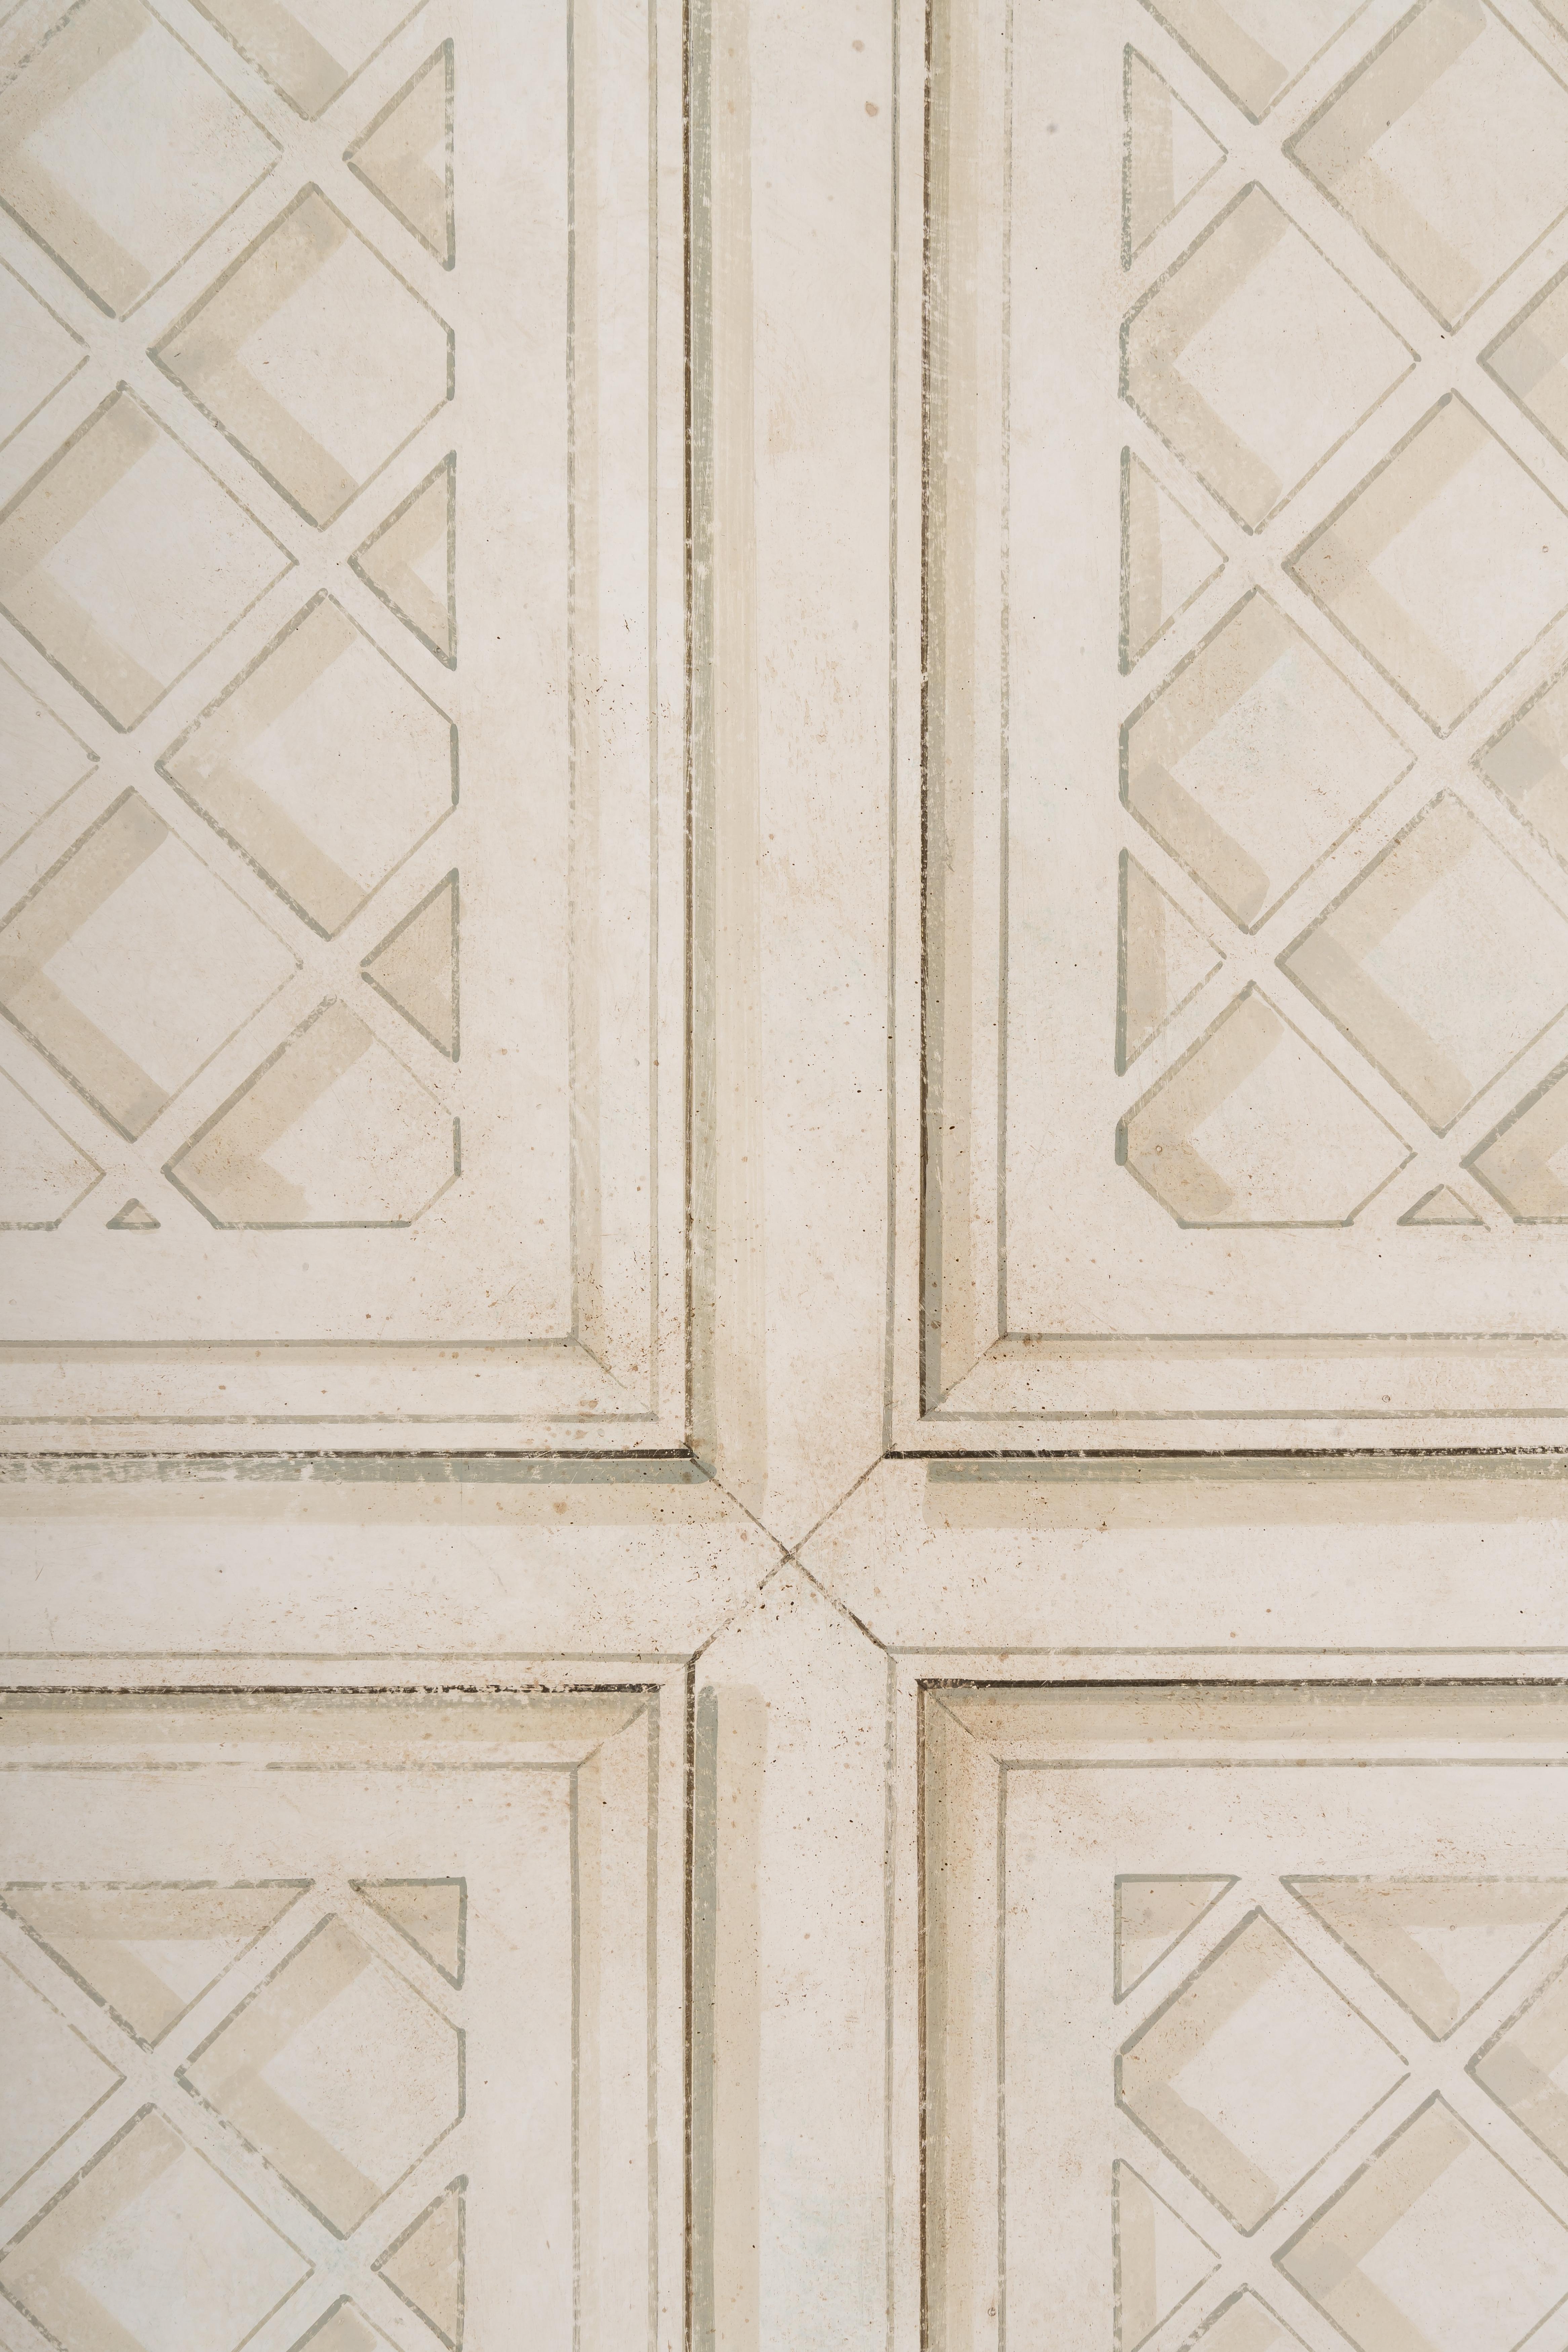 From our hand painted Furniture Collection, we are pleased to introduce you to our Criss-Cross Panel.
An exquisite decorative wooden panel with a trellis design in a soft palette of colors of whites and light taupes. 
Beautifully enhanced by a our